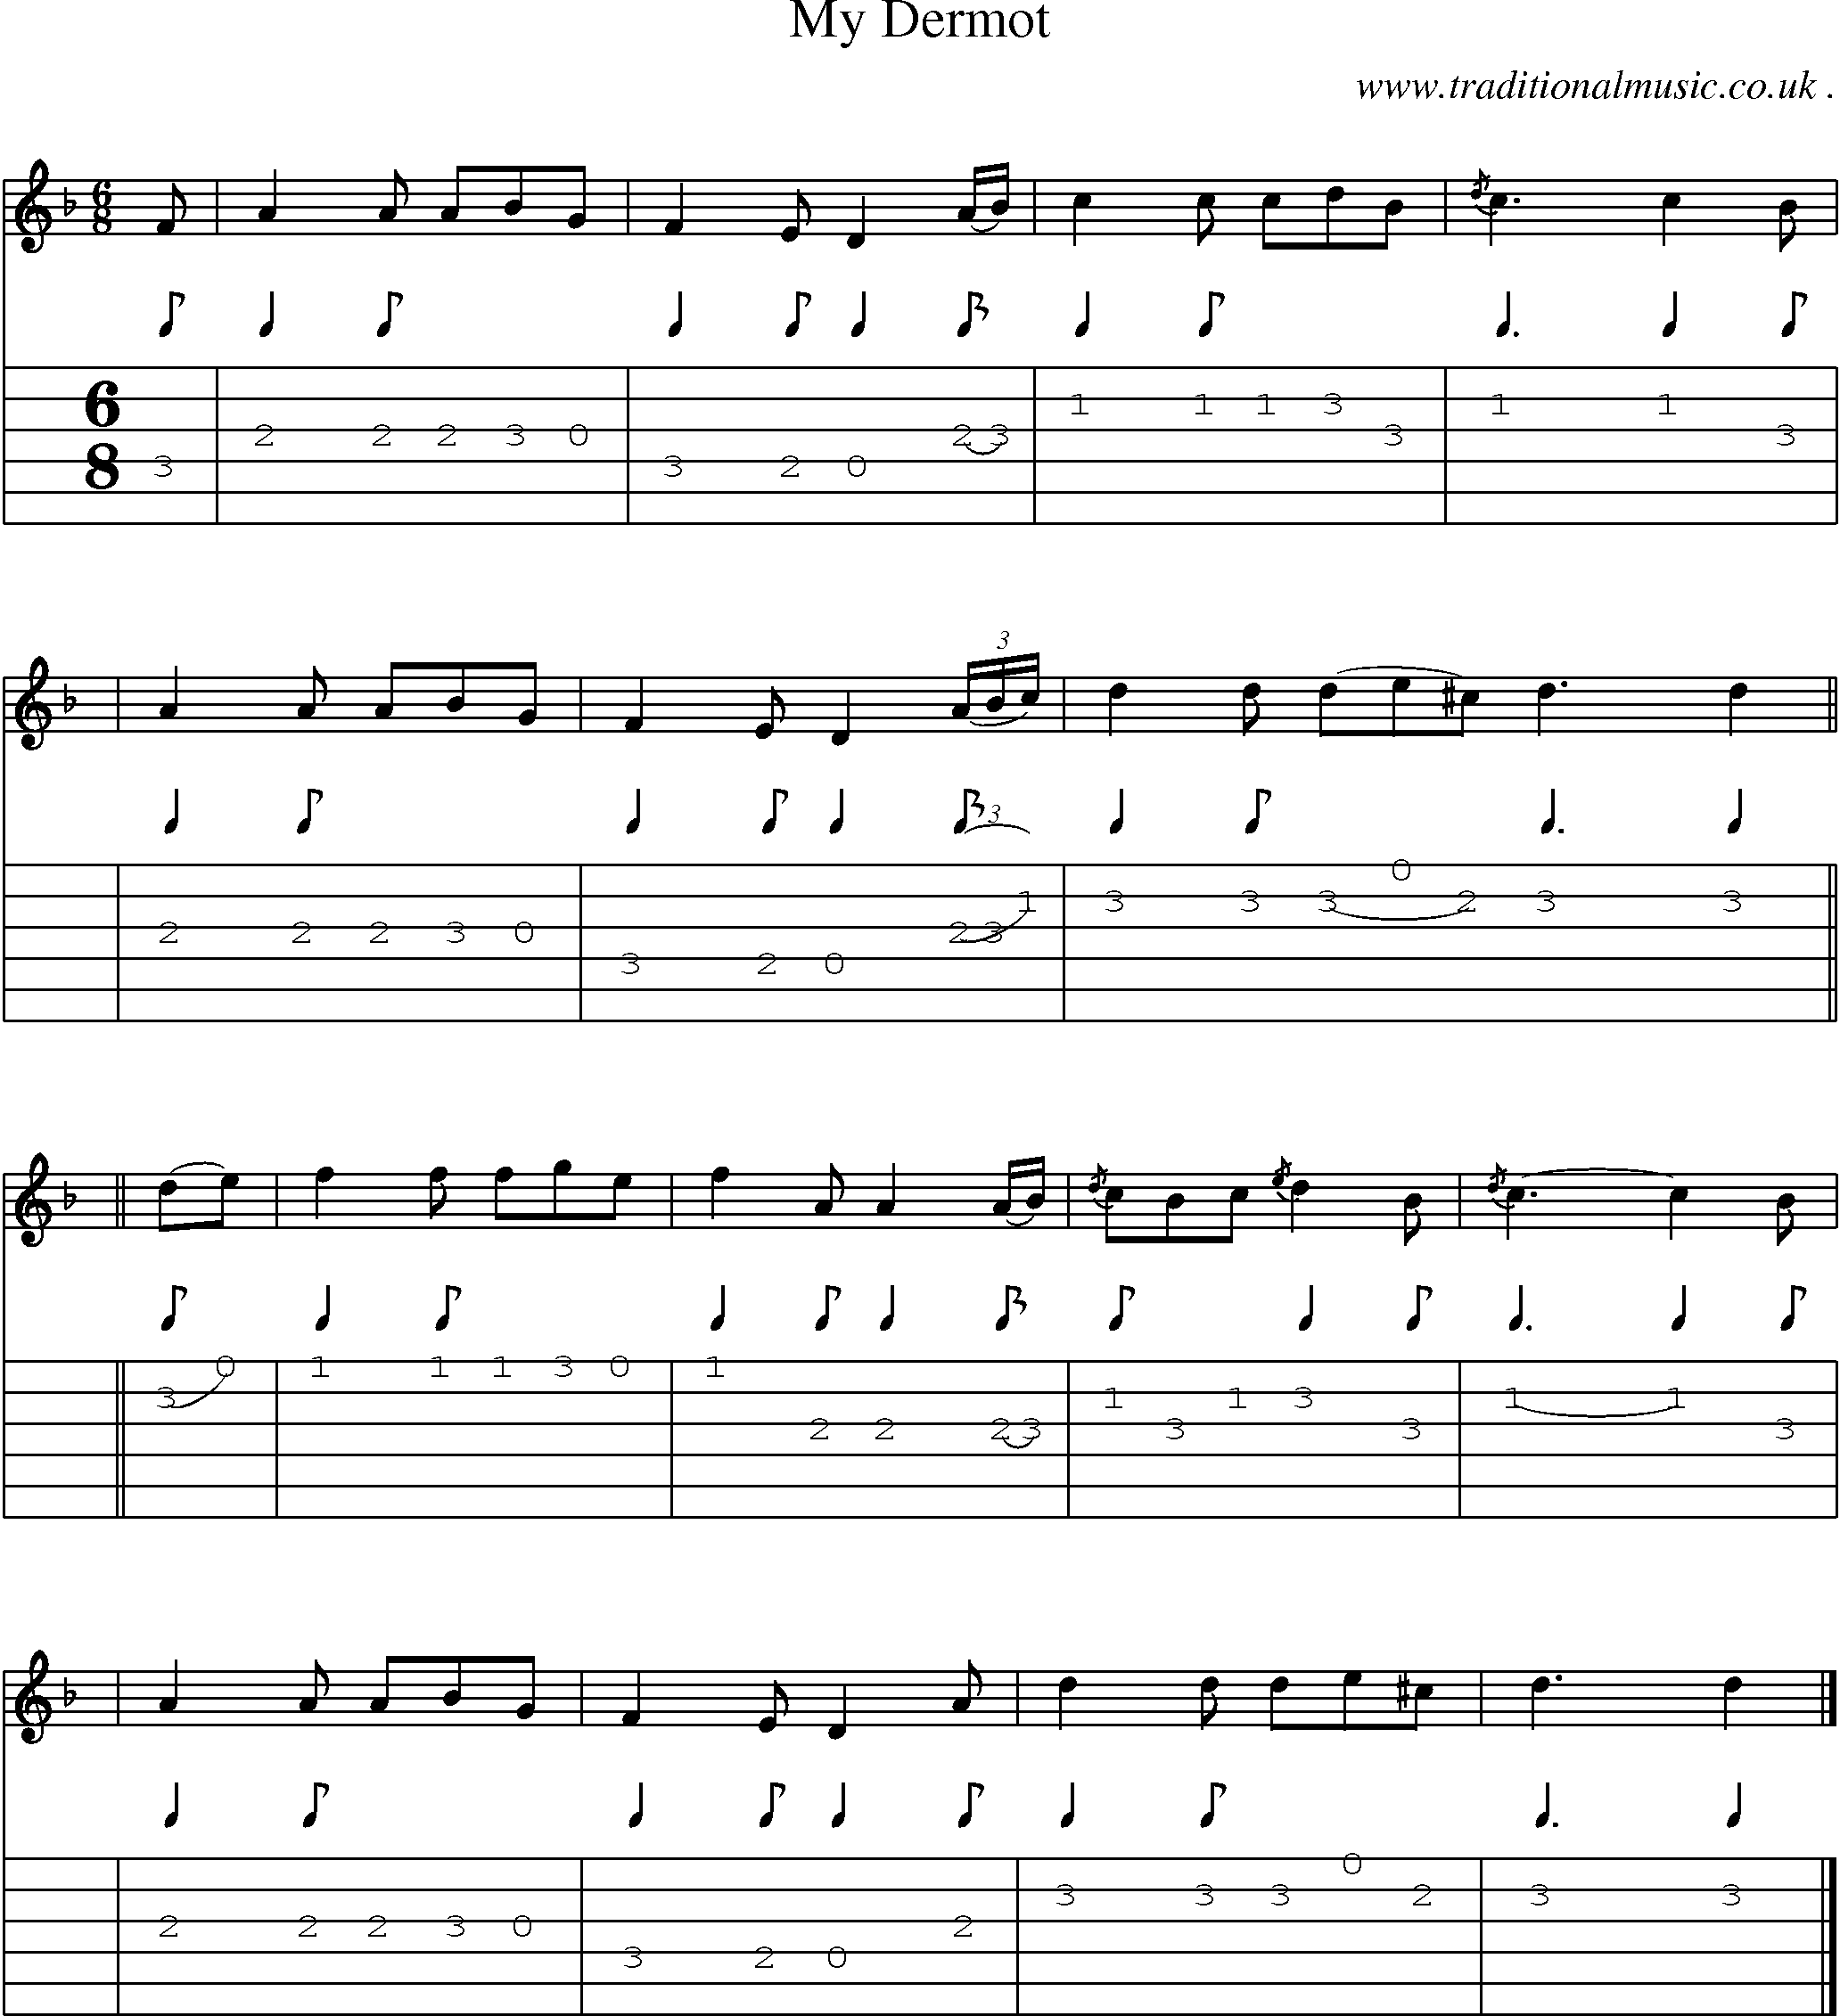 Sheet-music  score, Chords and Guitar Tabs for My Dermot